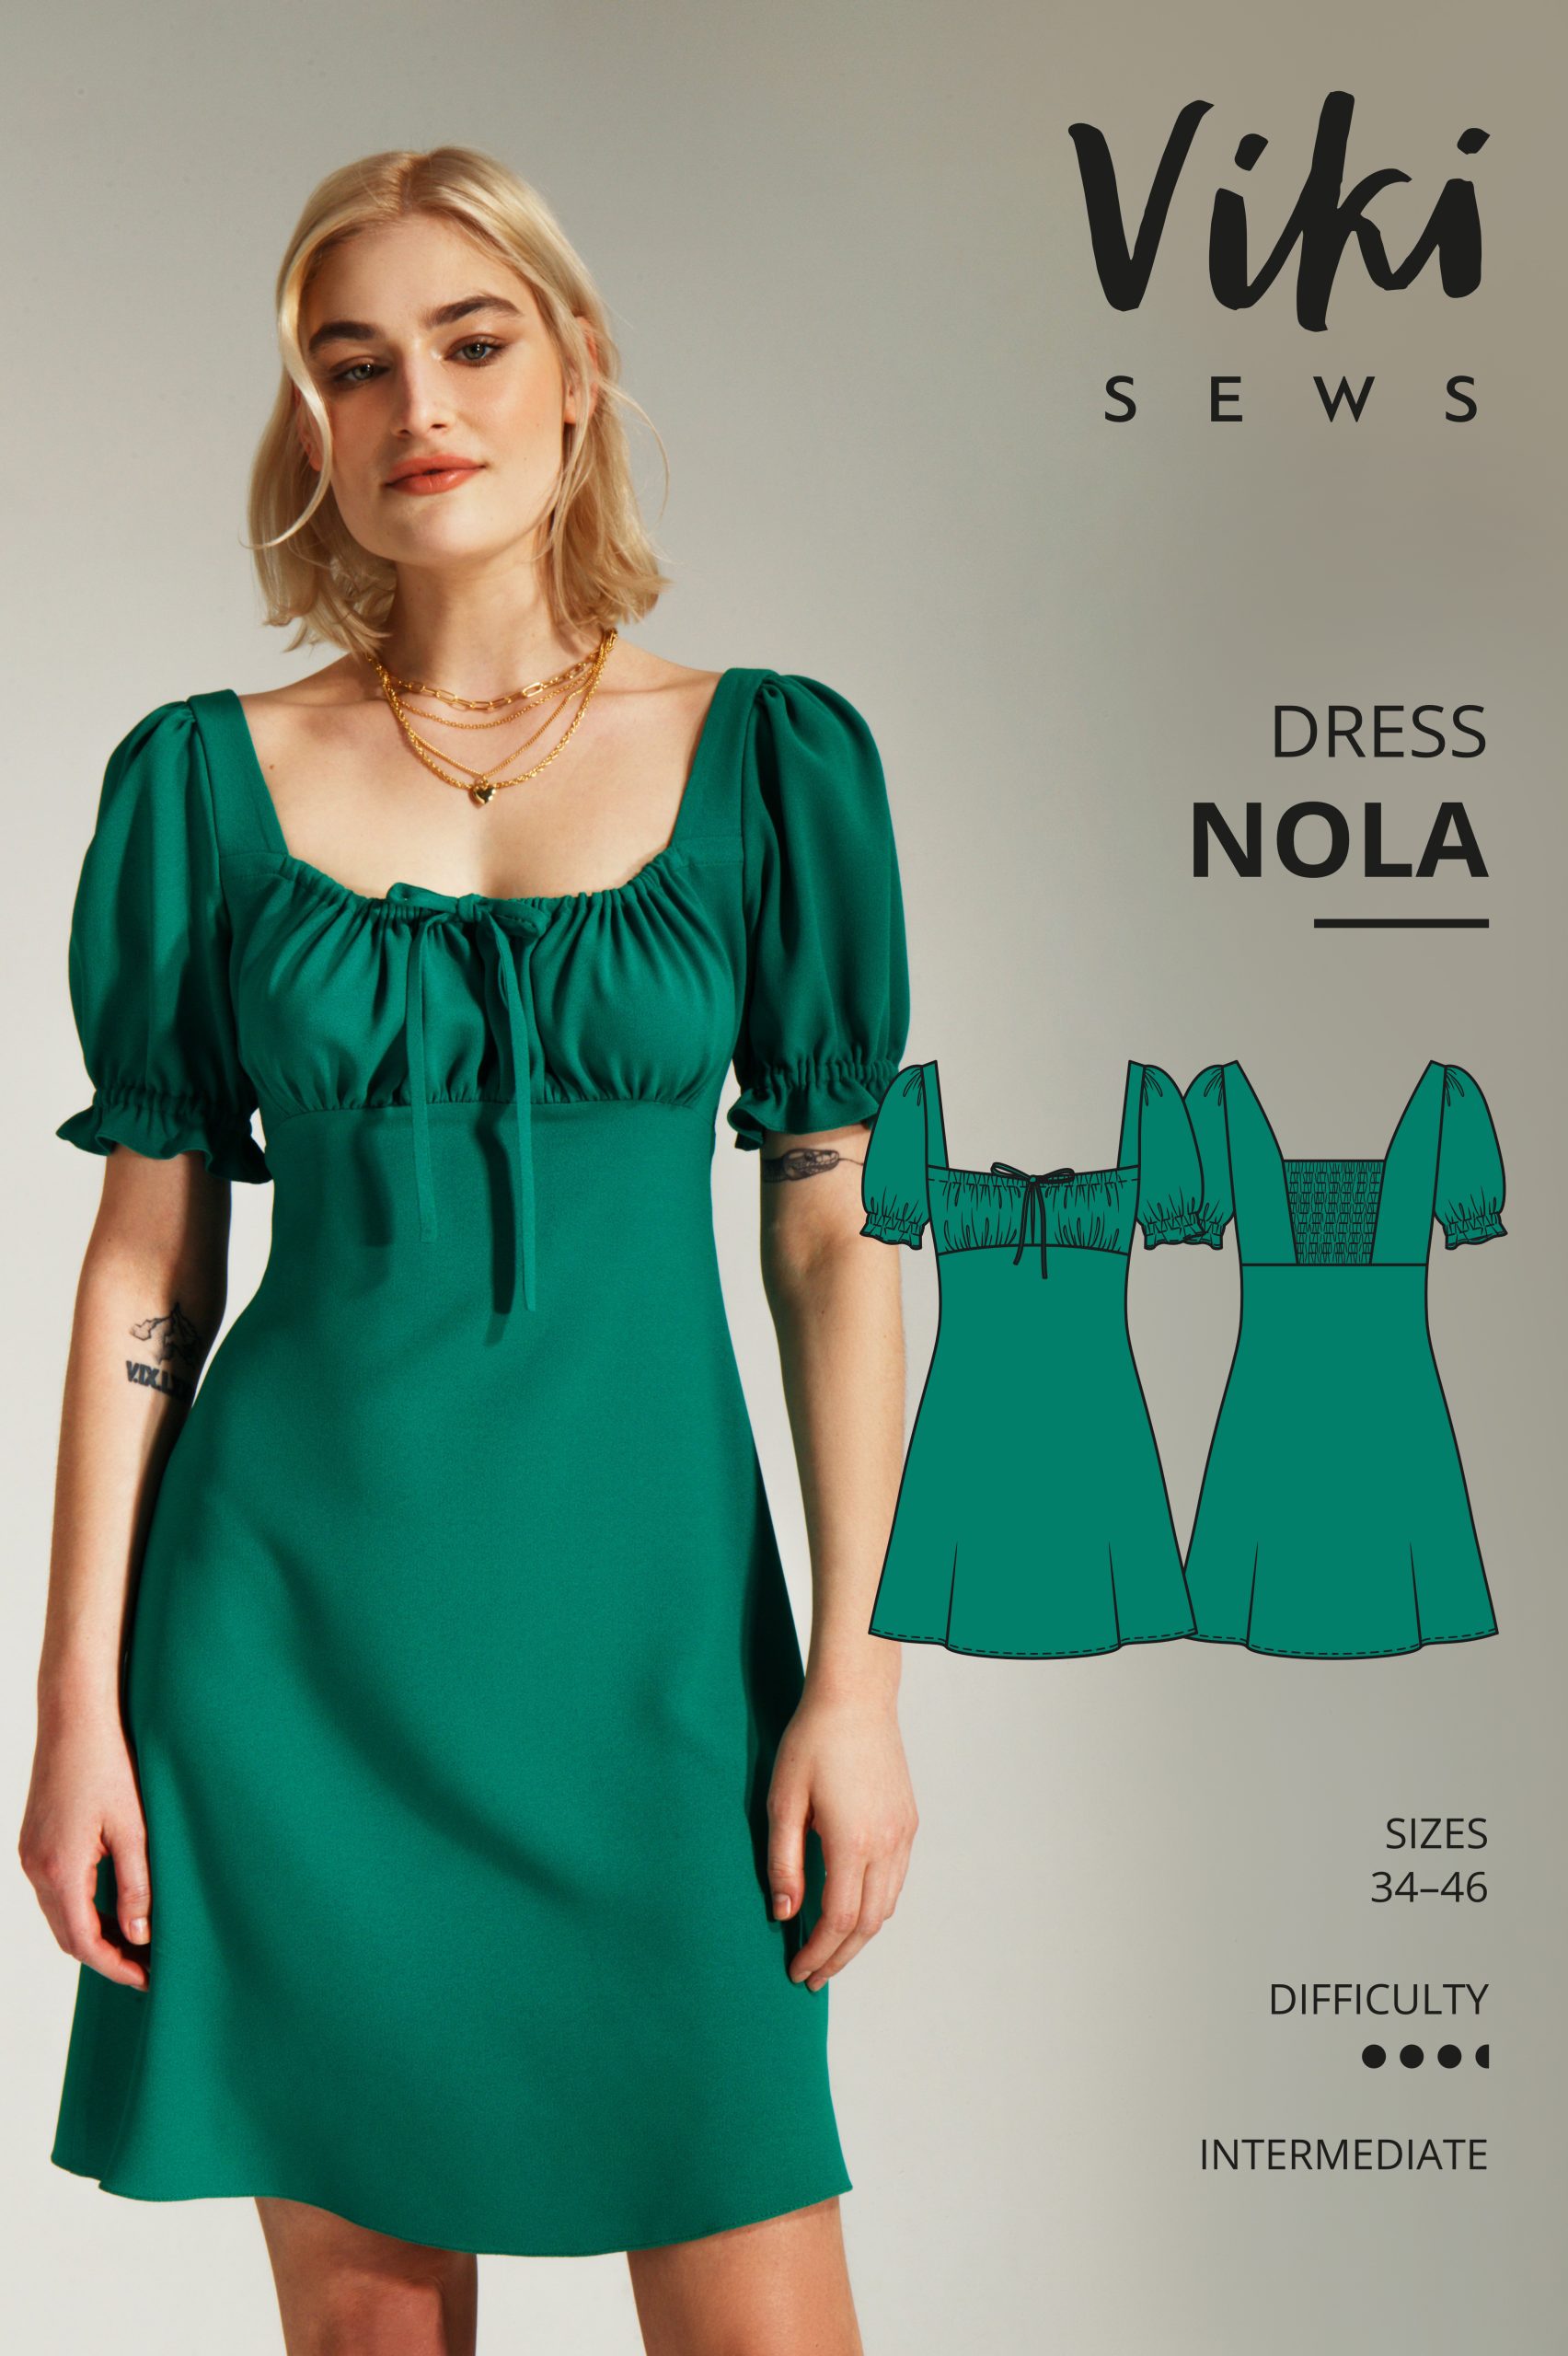 Vikisews Sewing Patterns for Women - Nola Summer Dress Sewing Pattern for  Women, Size US2 - US14 - Appropriate for Beginners with Easy to Follow